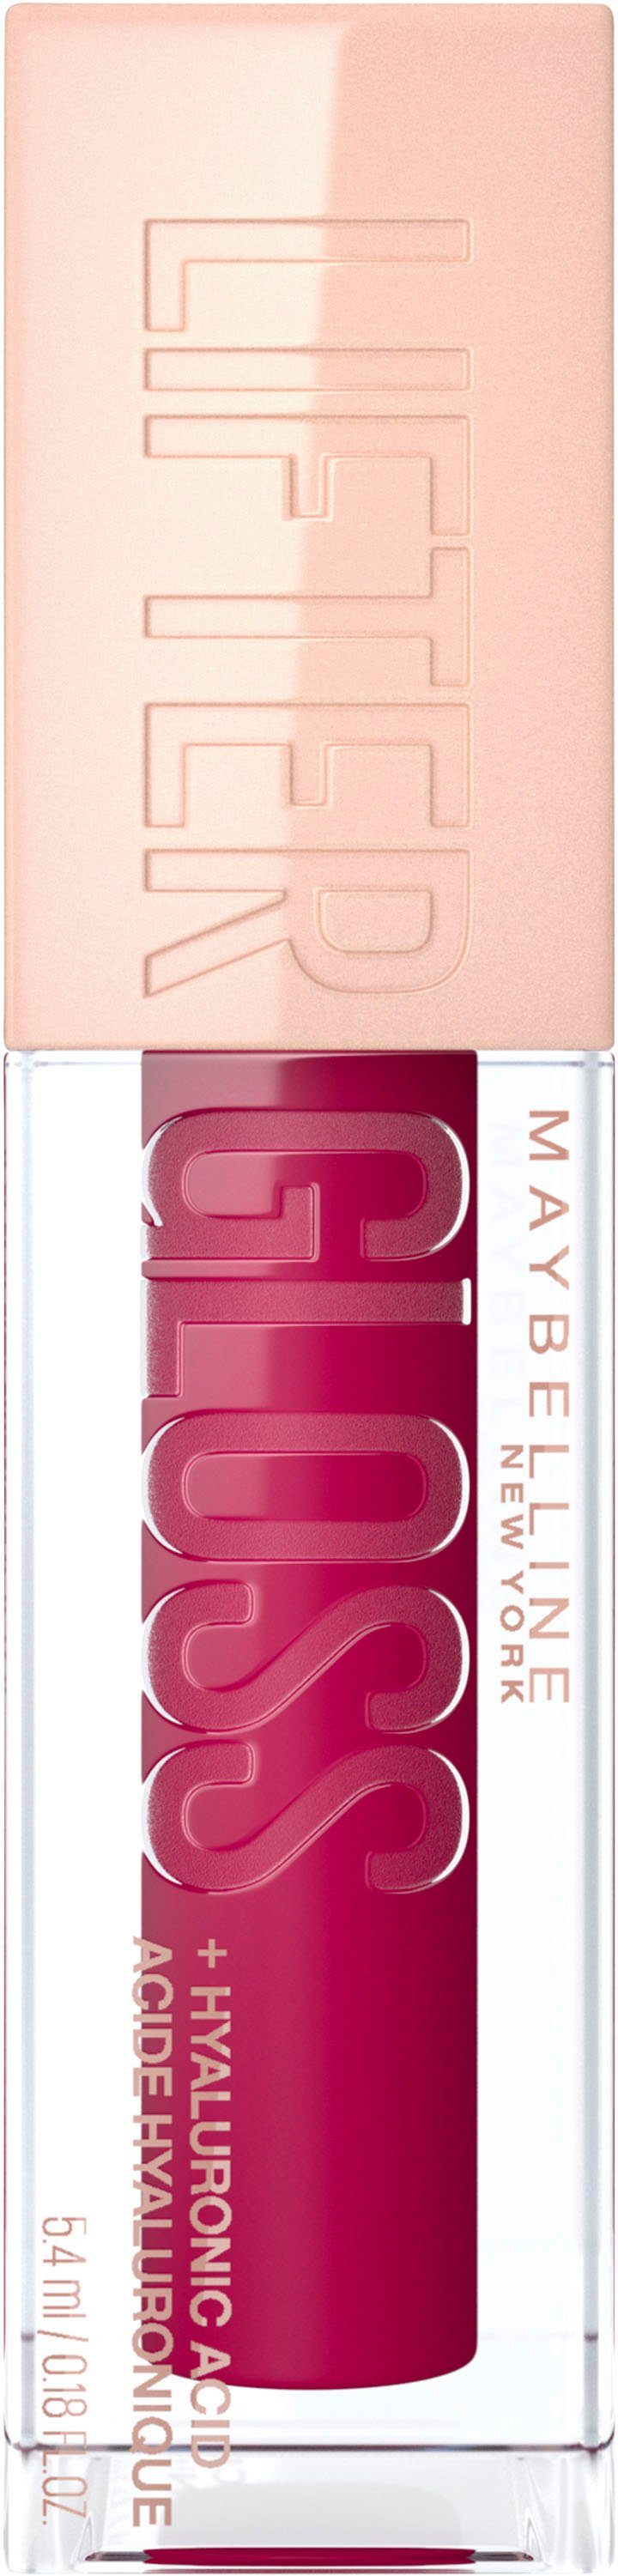 Lipgloss York New MAYBELLINE Maybelline NEW Lifter YORK Gloss